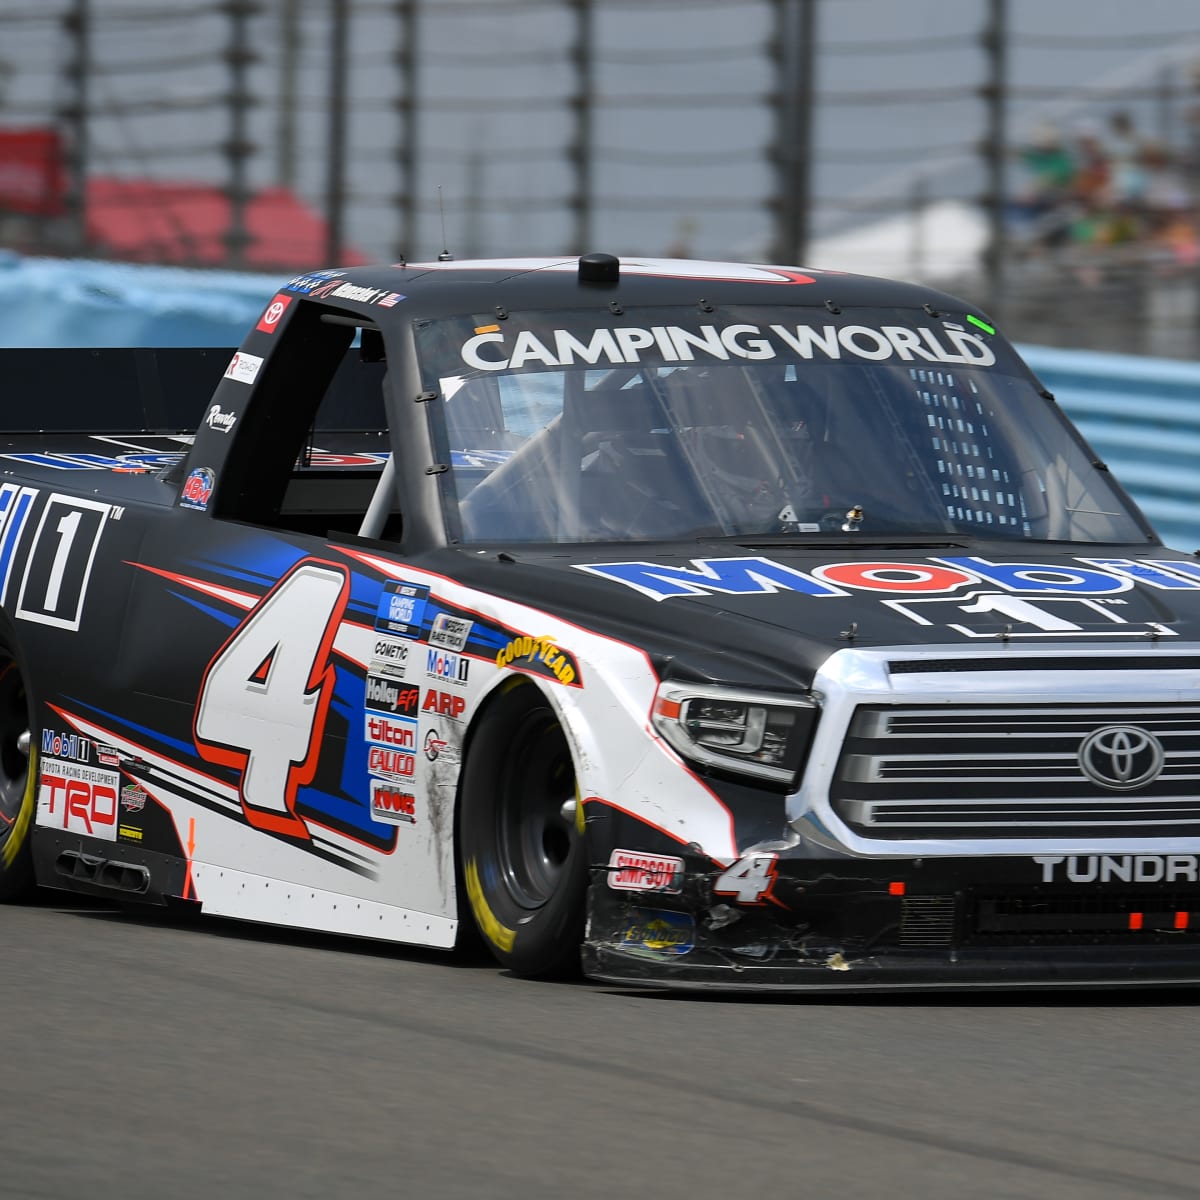 NASCAR Camping World Truck Series NextEra Energy 250, Practice Live Stream Watch Online, TV Channel, Start Time - How to Watch and Stream Major League and College Sports